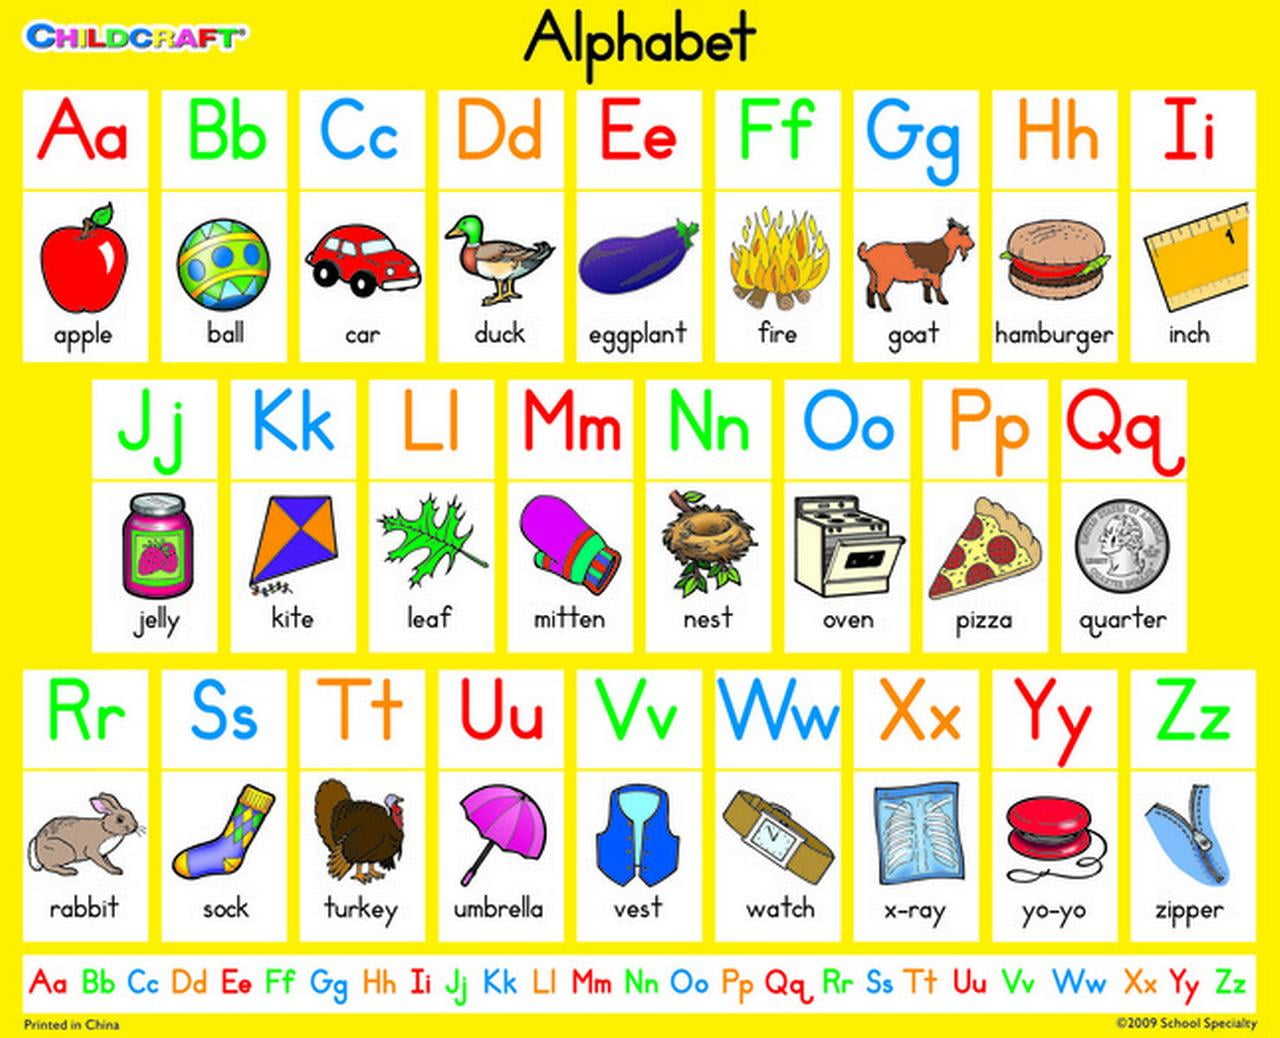 Childcraft Student Sized English Alphabet Charts, 11 x 9 Inches, Set of